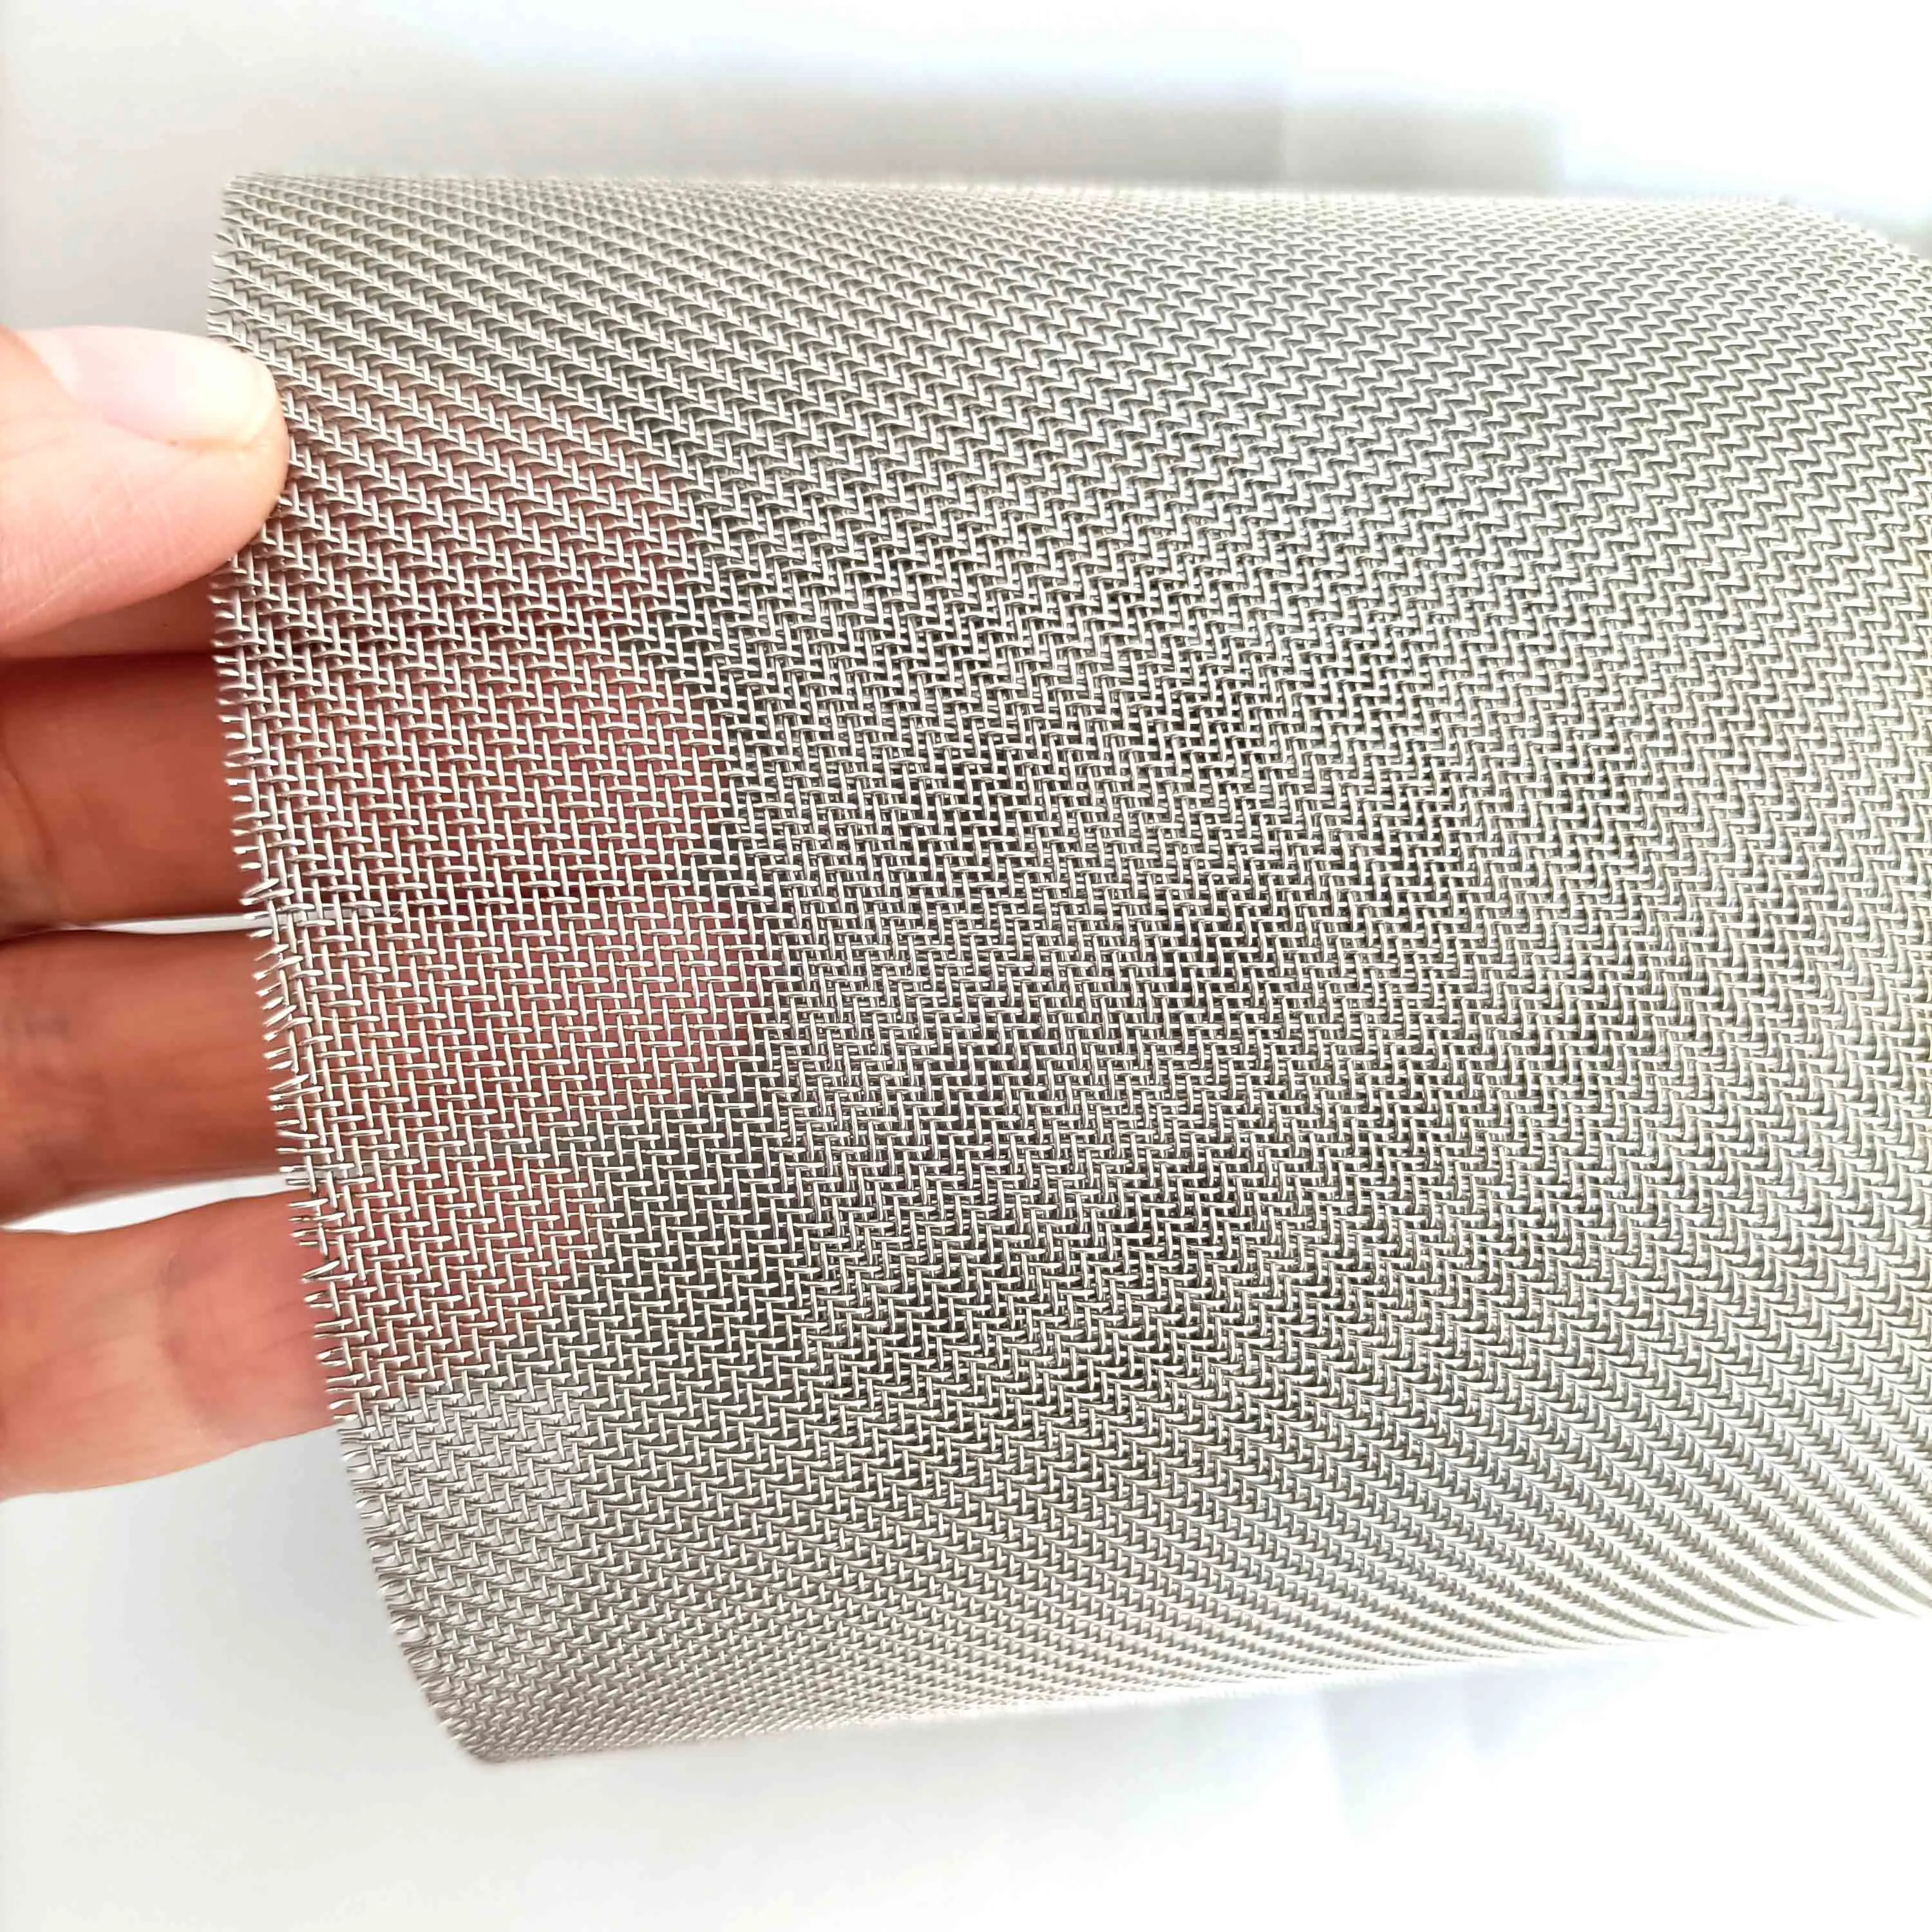 Food Grade SUS 304 316 316L 20 25 50 60 70 80 90 100 150 200 300 500 Micron Stainless Steel Twill Filter Wire Mesh